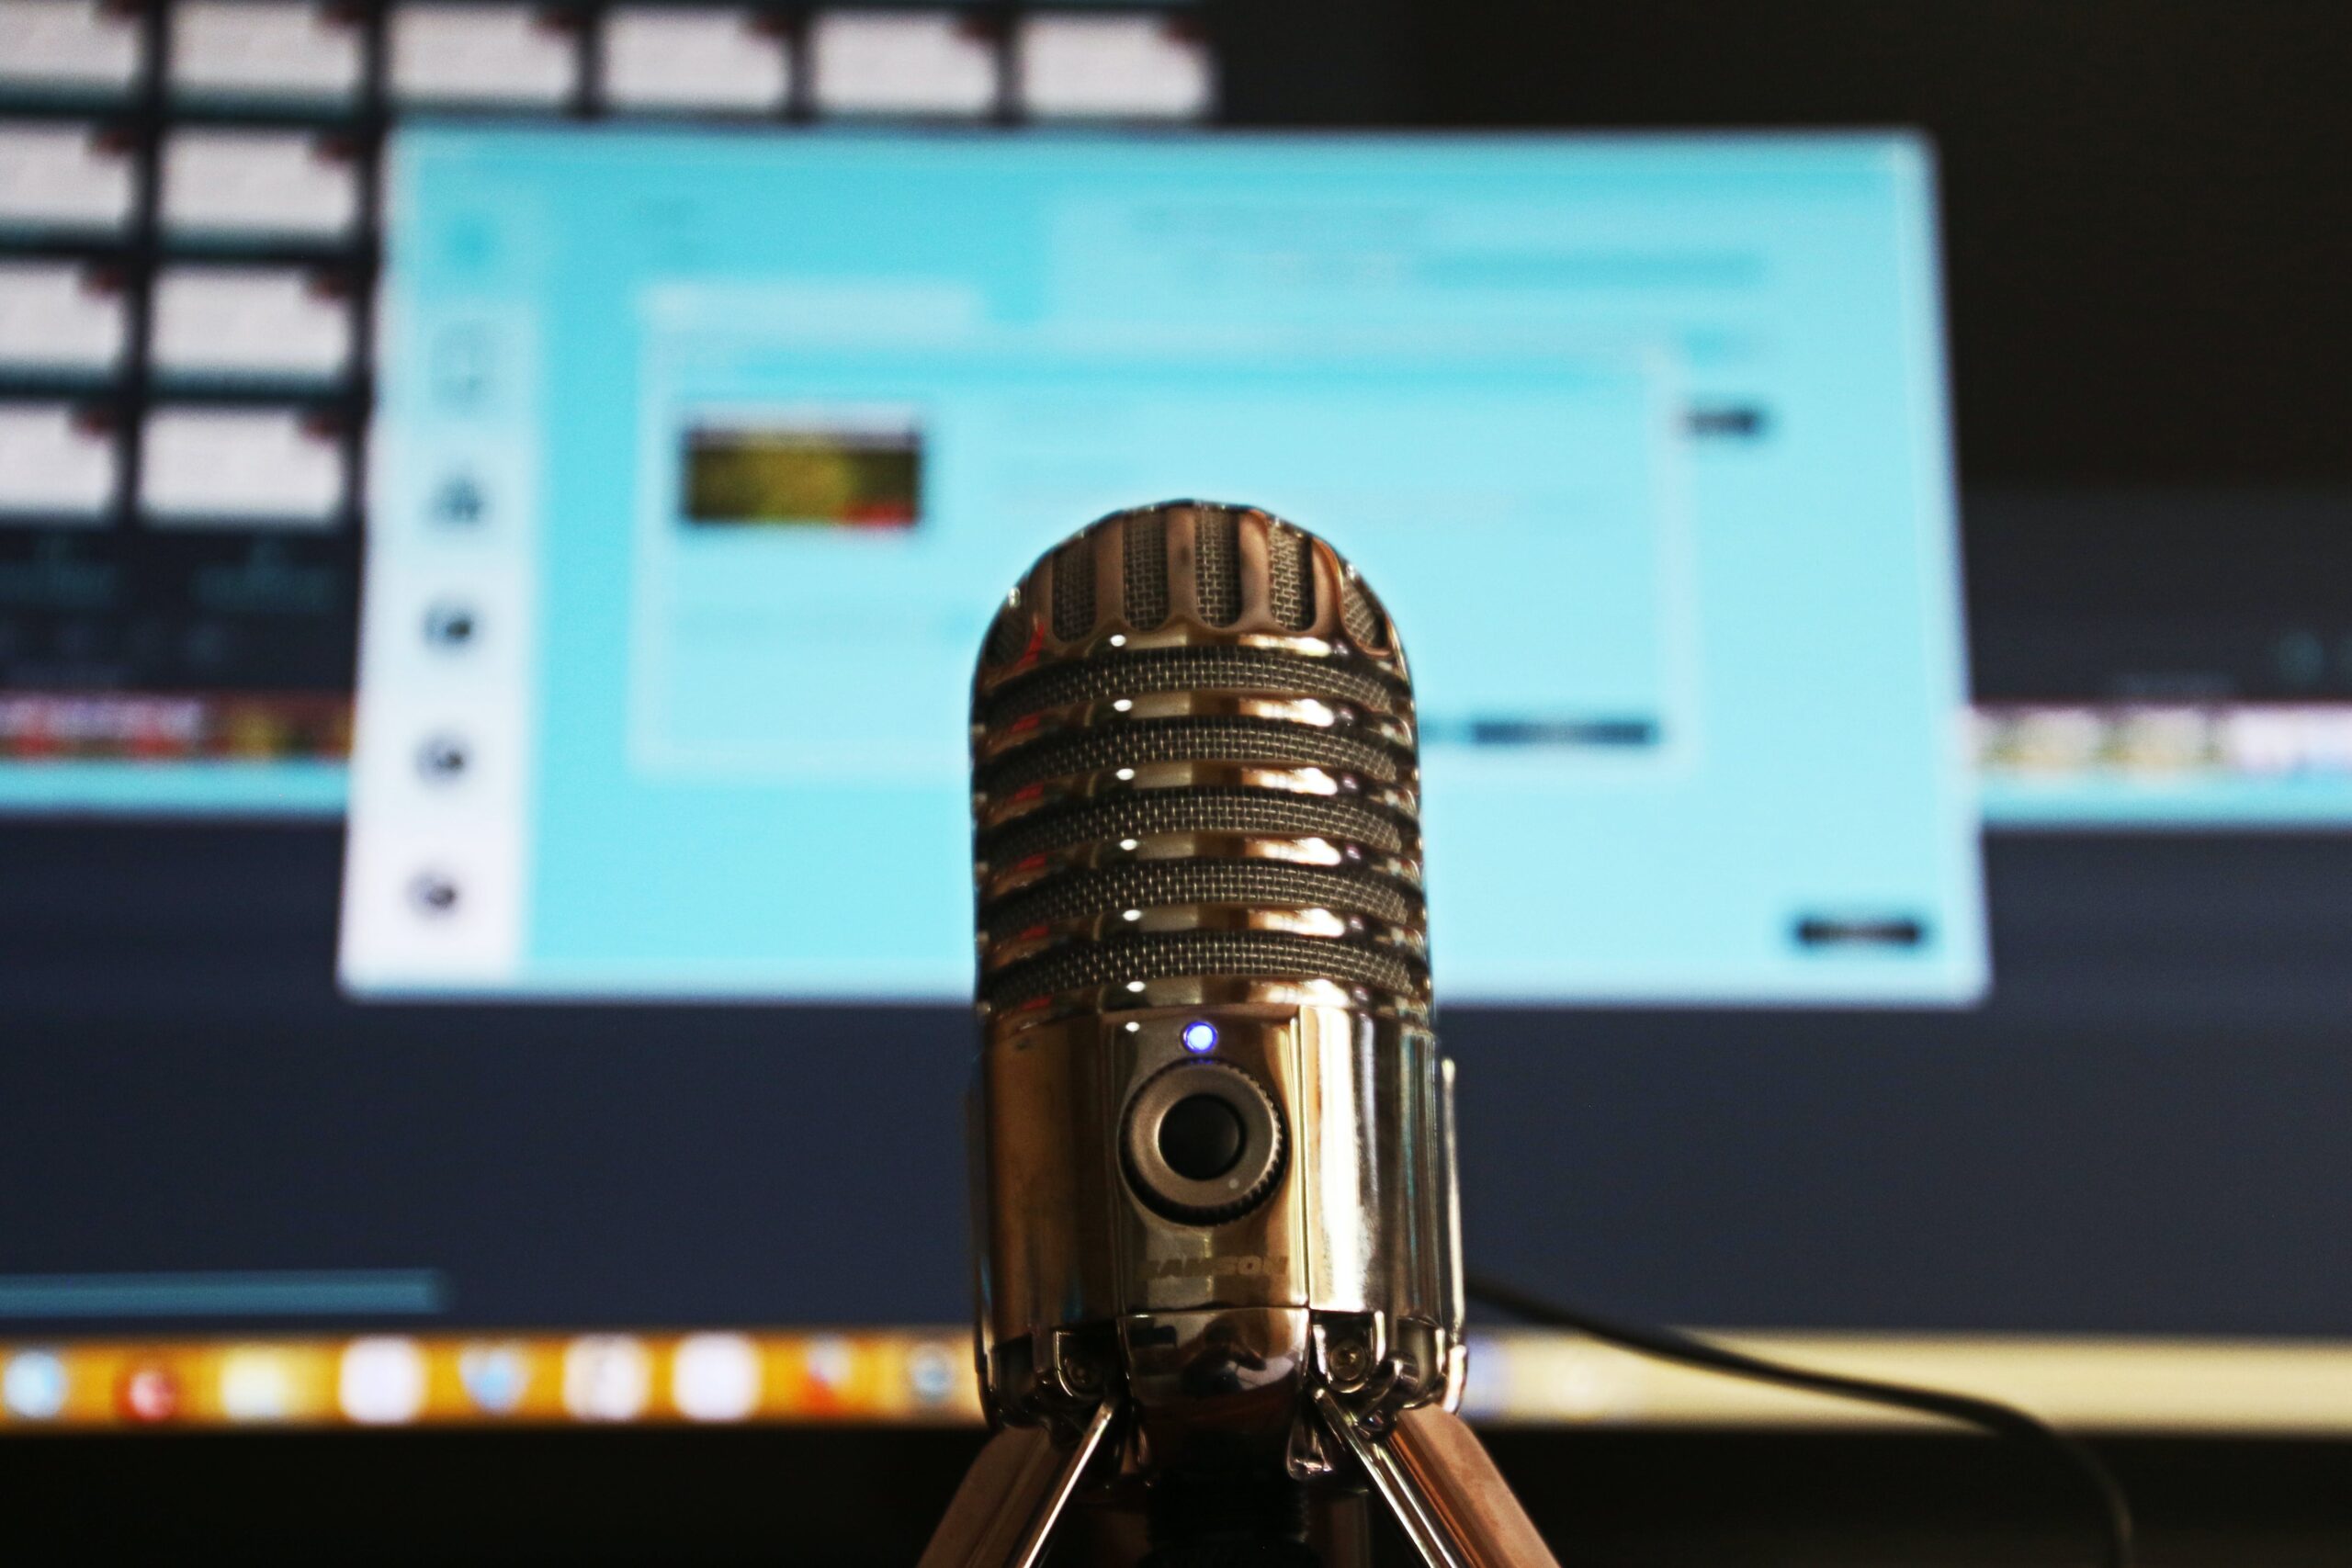 Podcast microphone in front of laptop